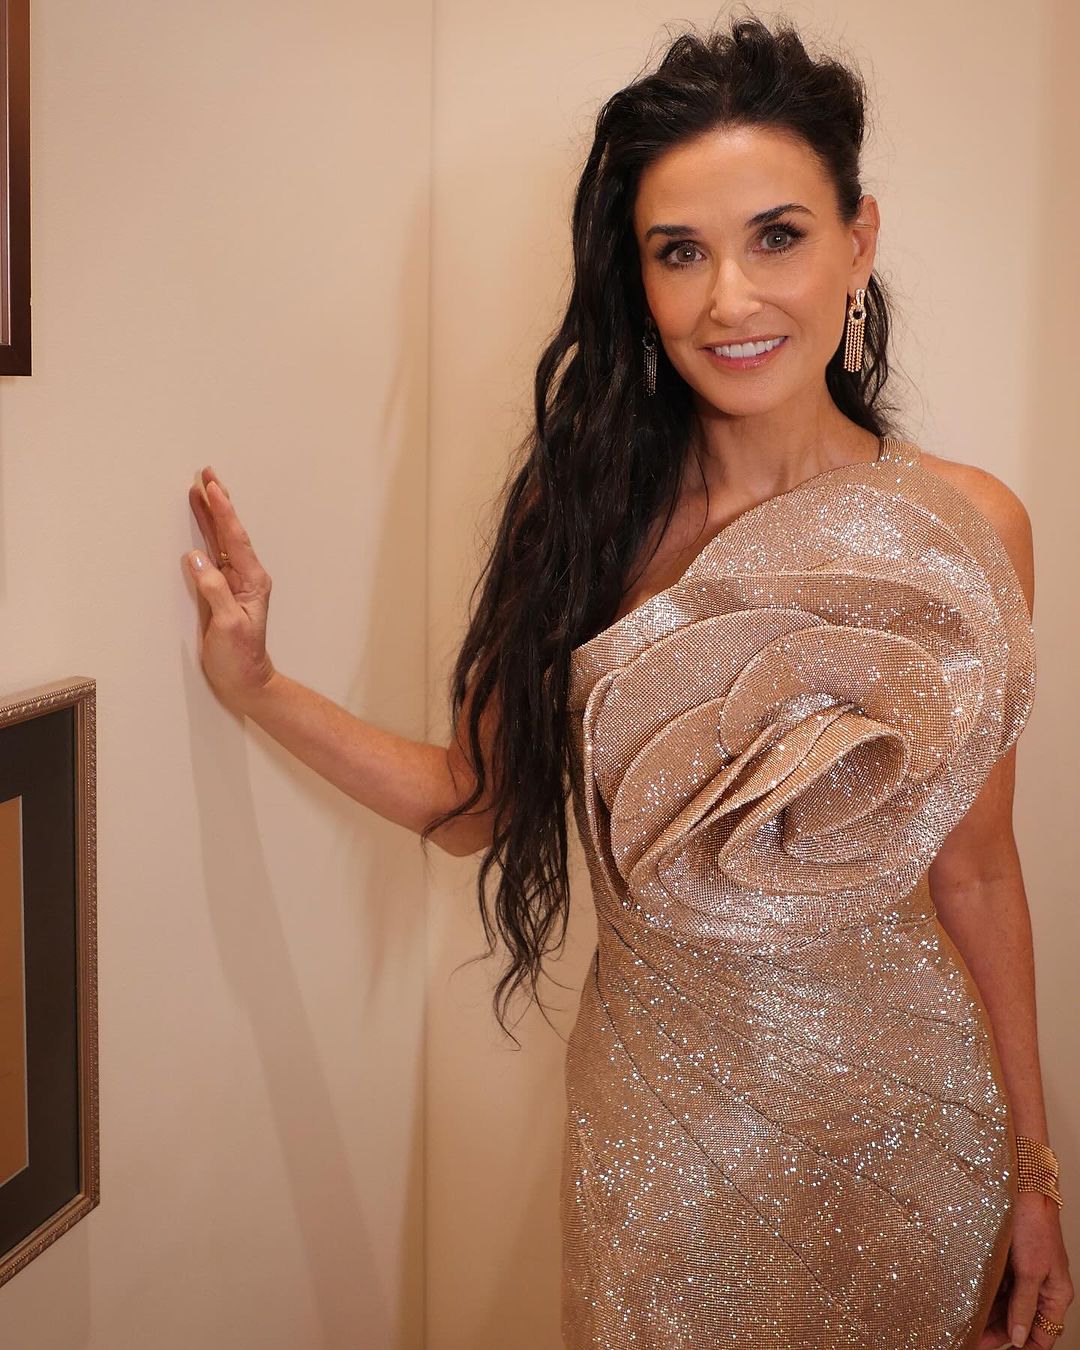 Demi Moore’s shiny outfit for the Academy Museum Gala